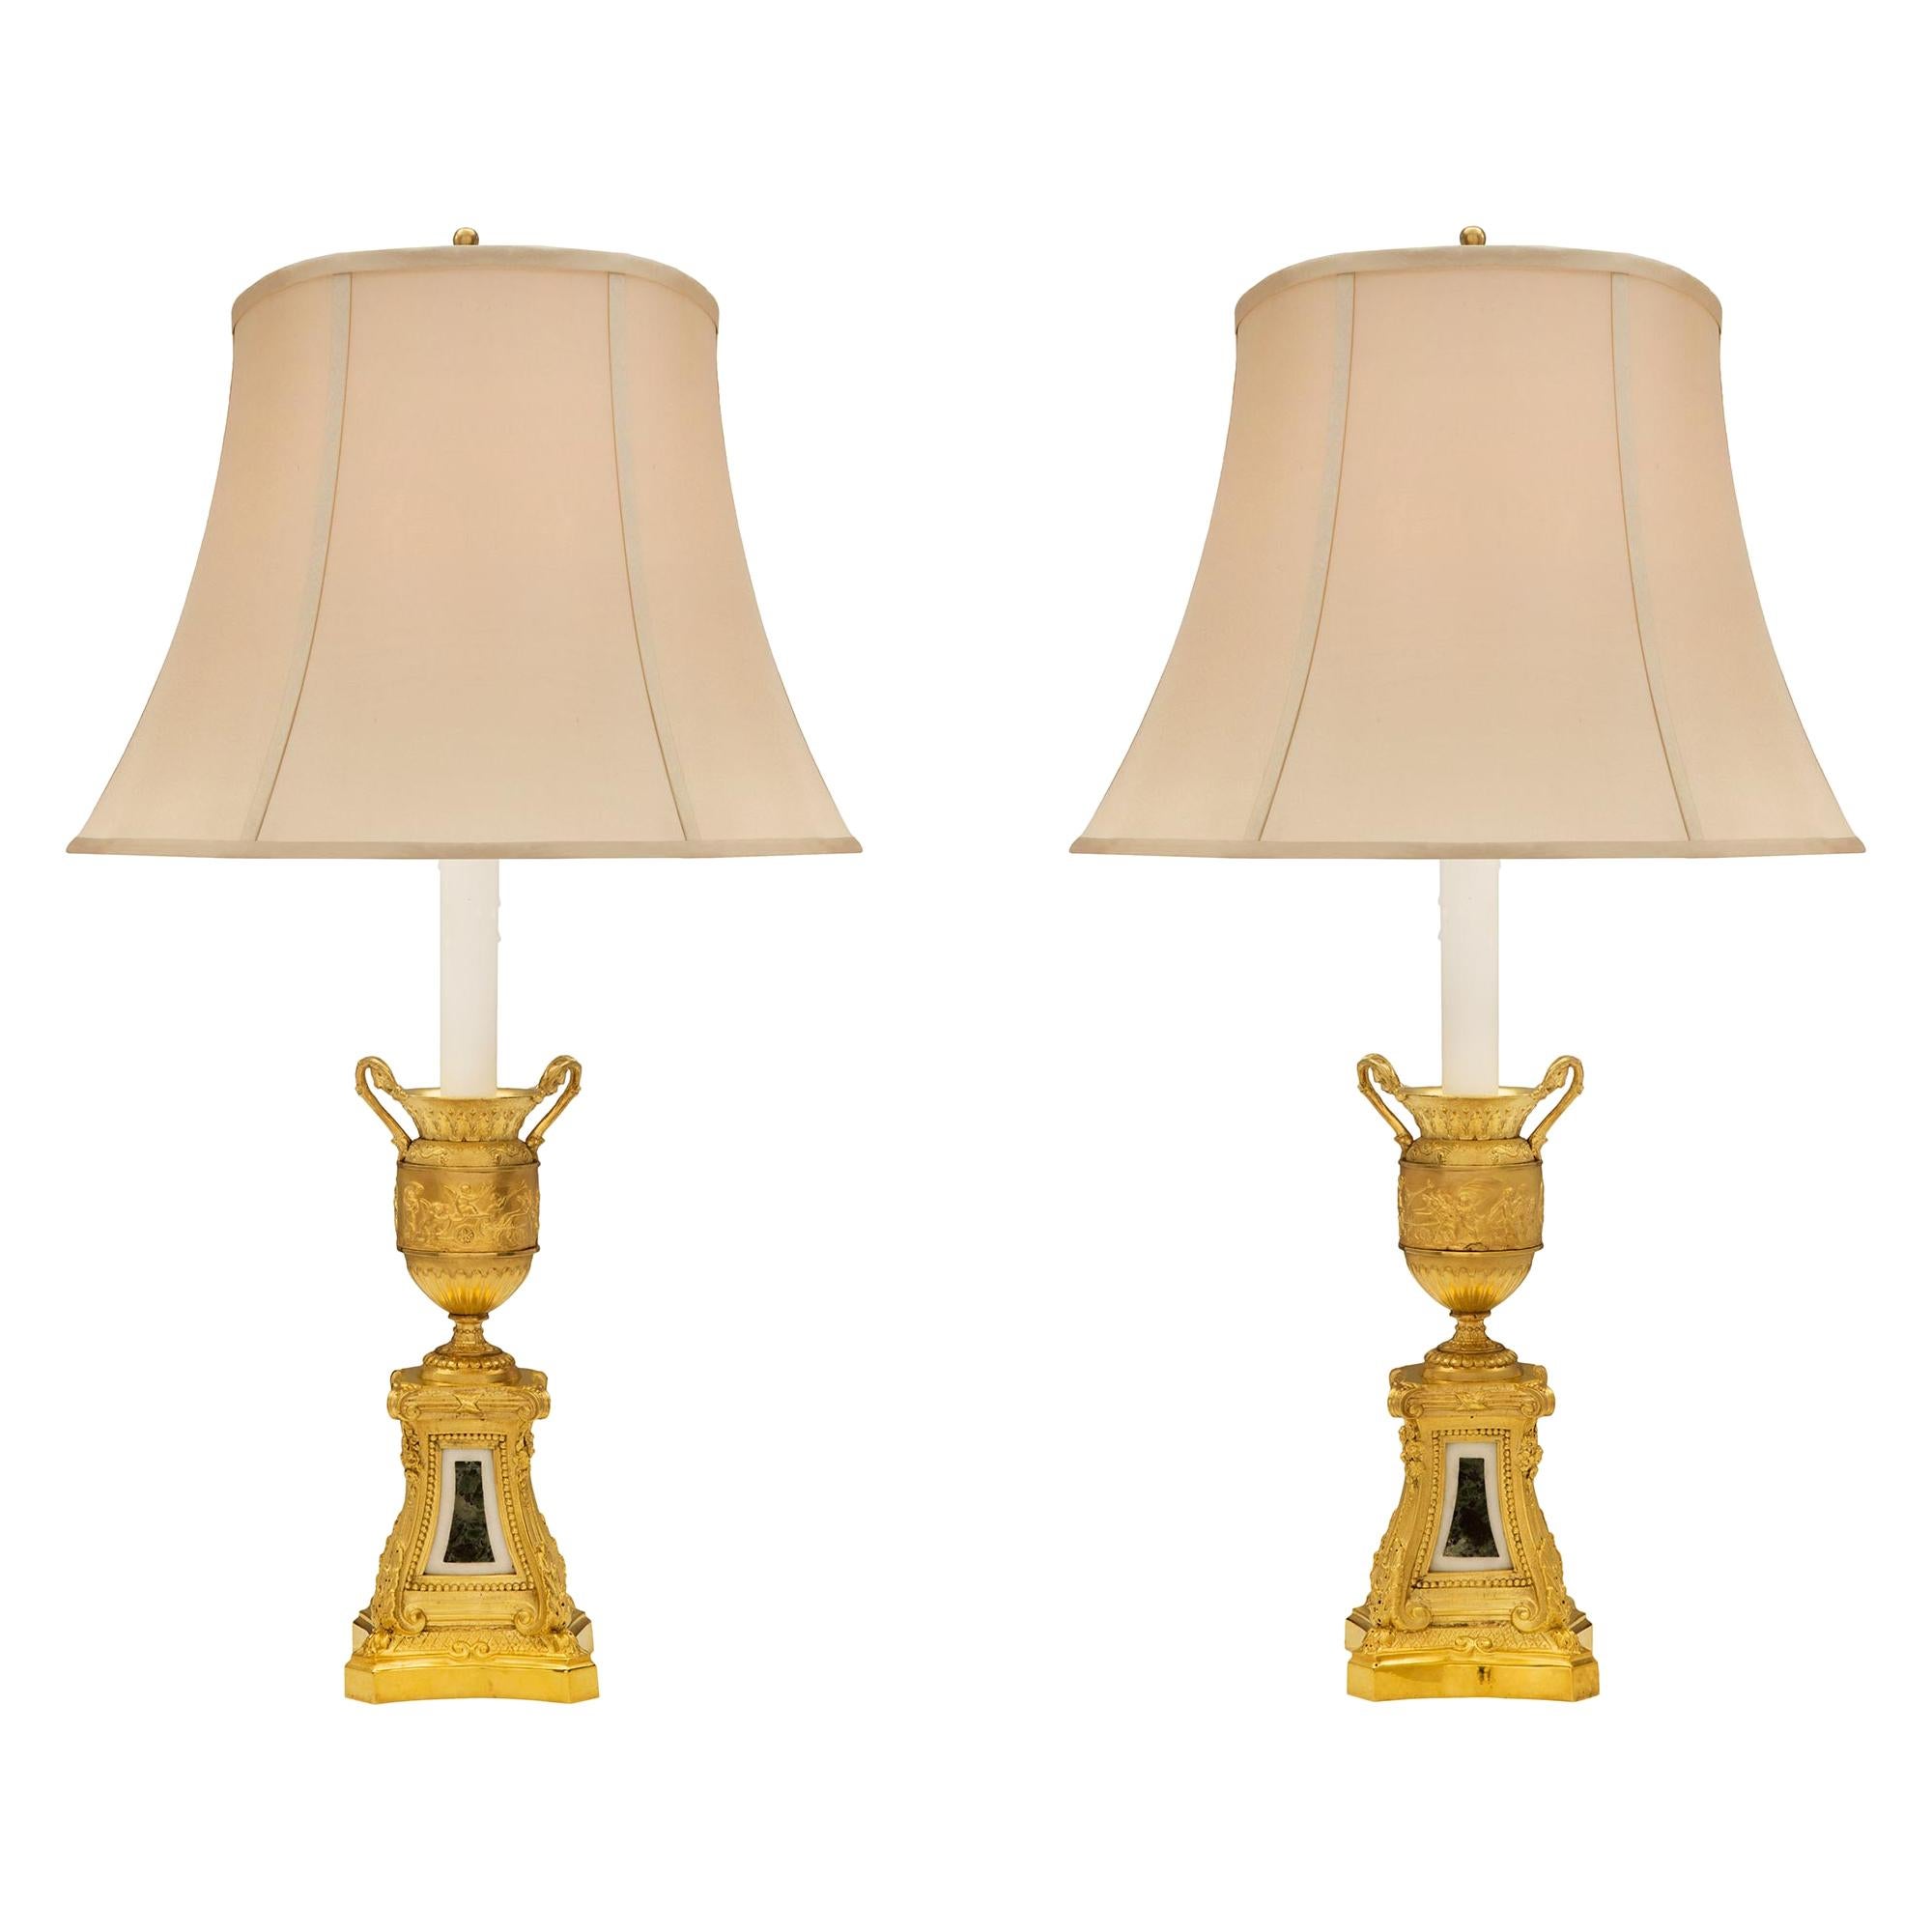 Pair of French 19th Century Louis XVI Style Ormolu and Marble Lamps For Sale